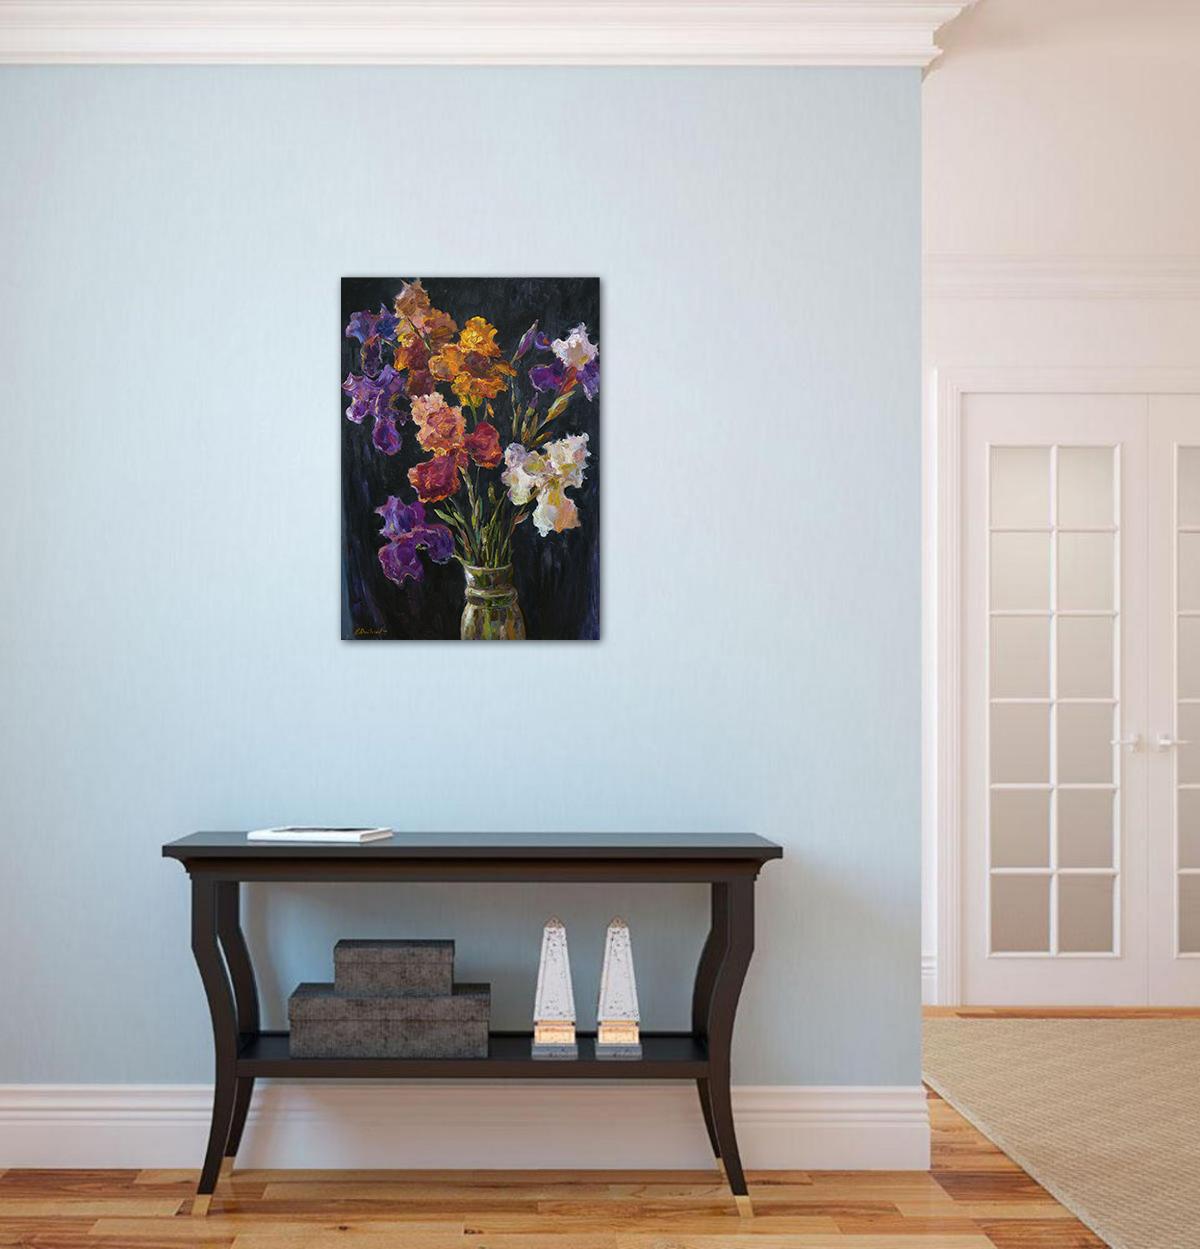 Bright floral painting with irises are stylish and modern, yellow, purple, white and red flowers looks great against the black background. The impressionist semi-abstract still life will become a beautiful home decoration. The artwork is created